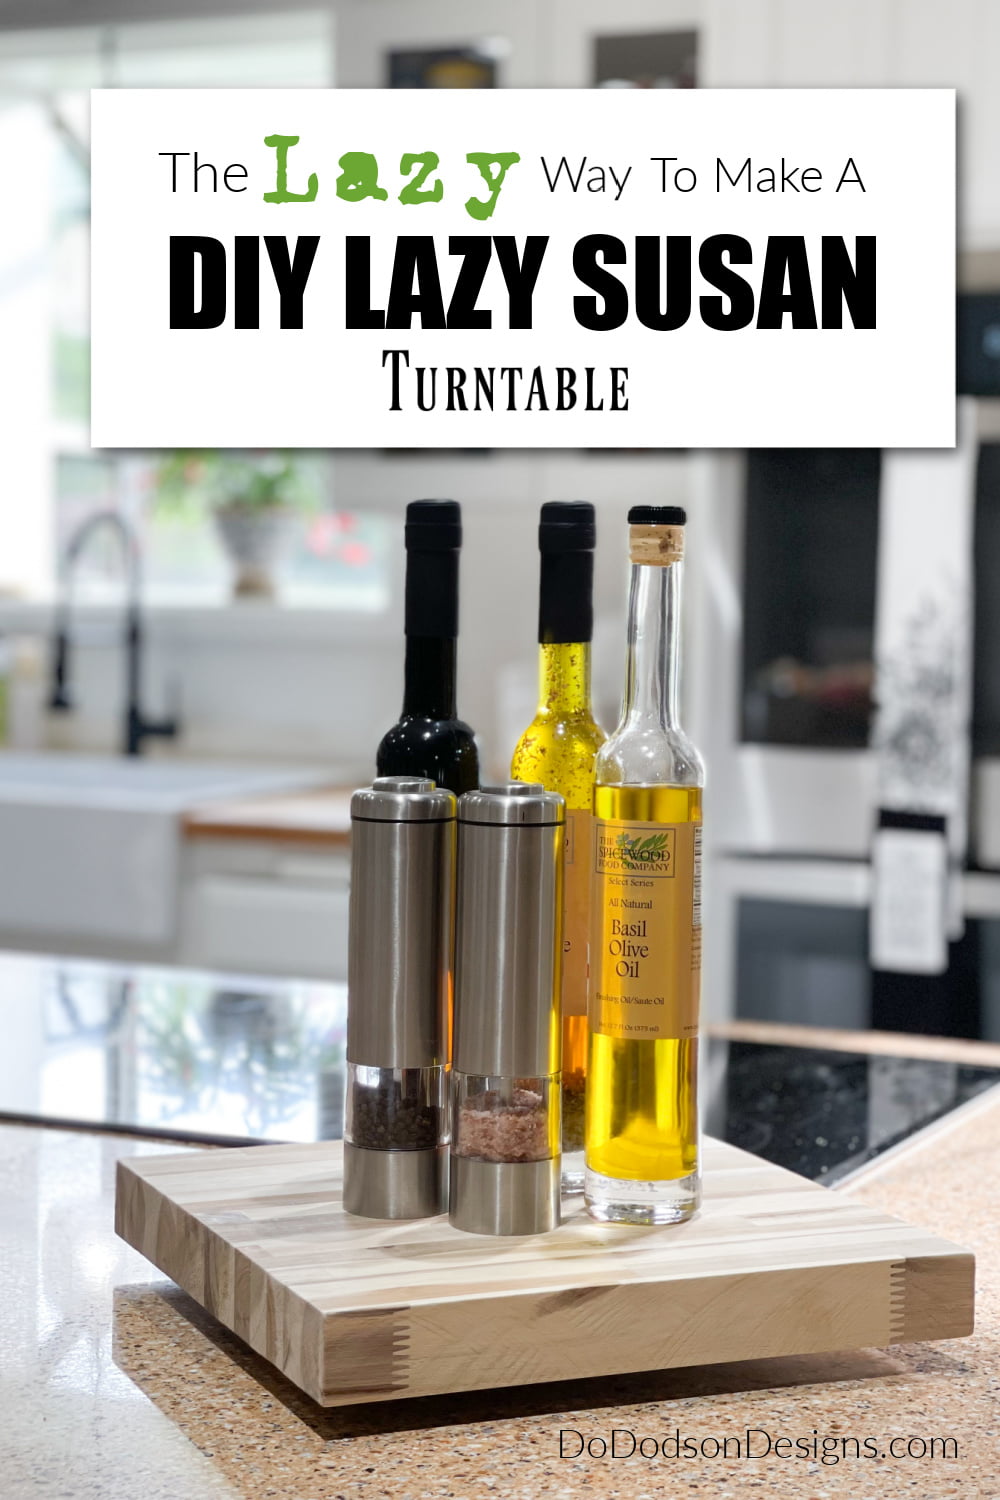 The Lazy Way To Make A DIY Lazy Susan Turntable